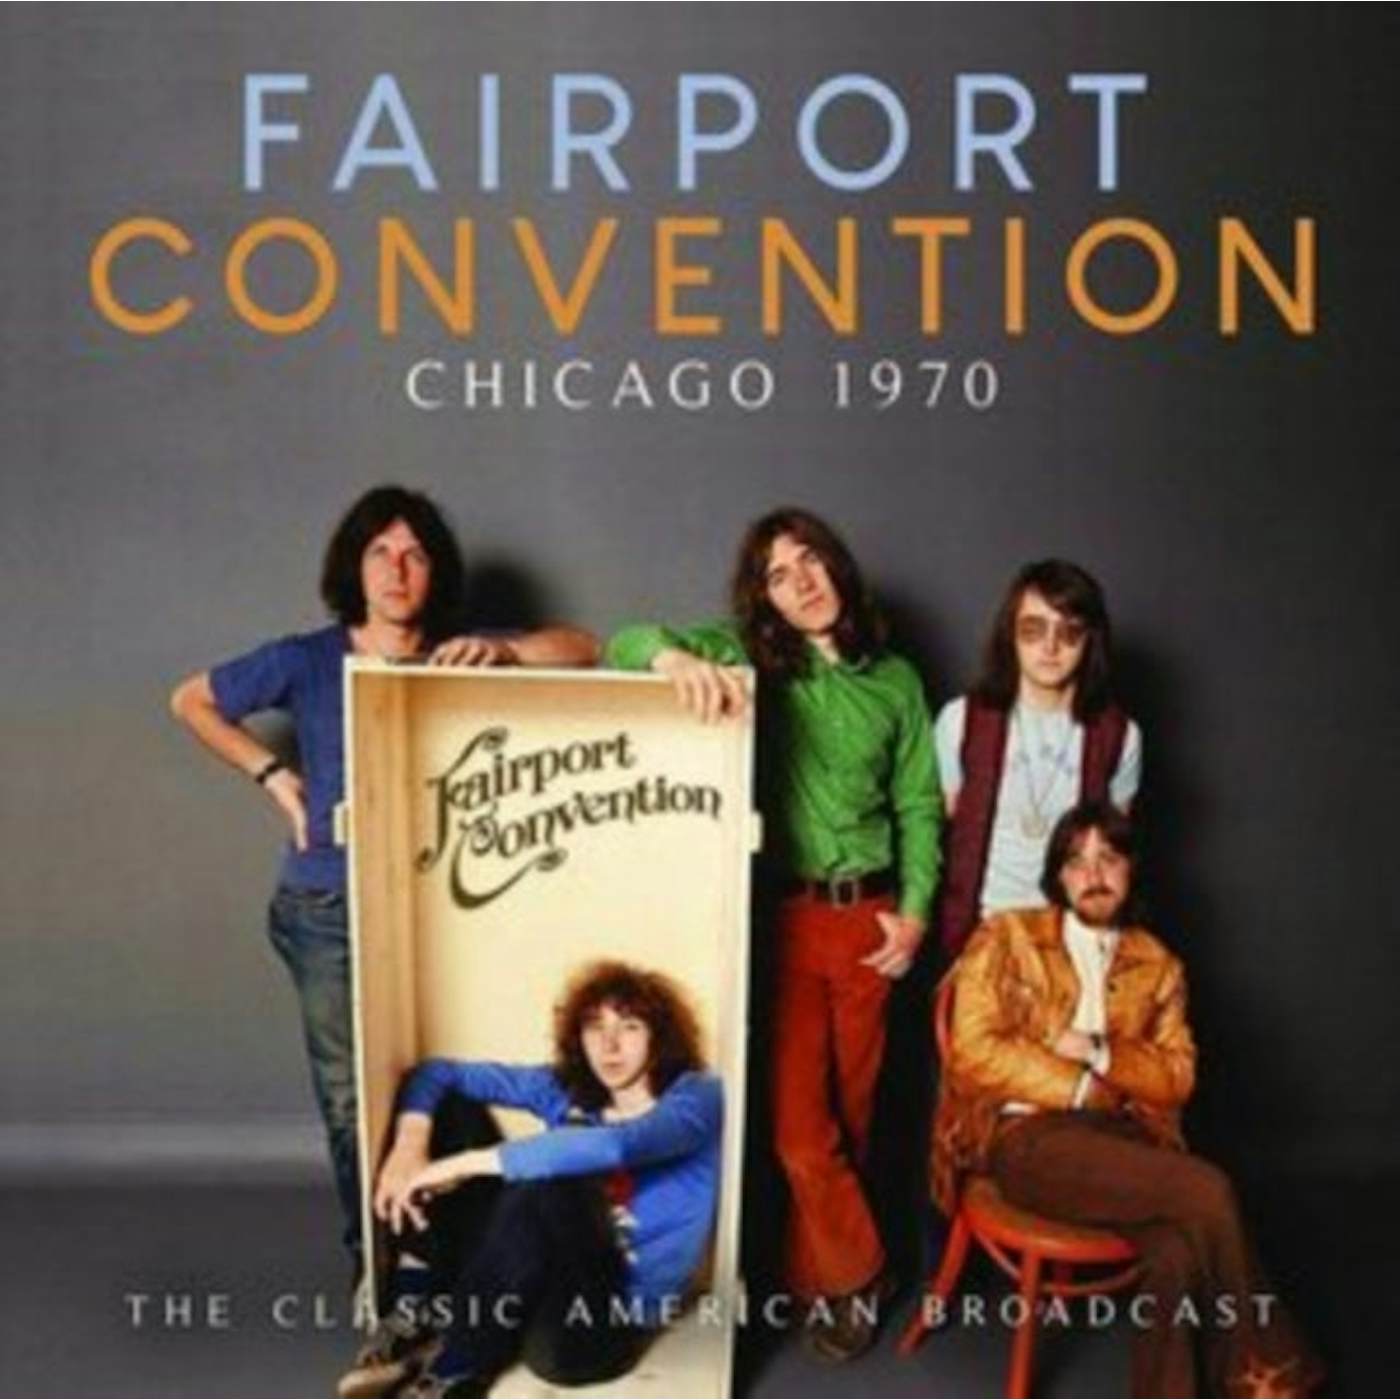 Fairport Convention CD - Chicago 1970